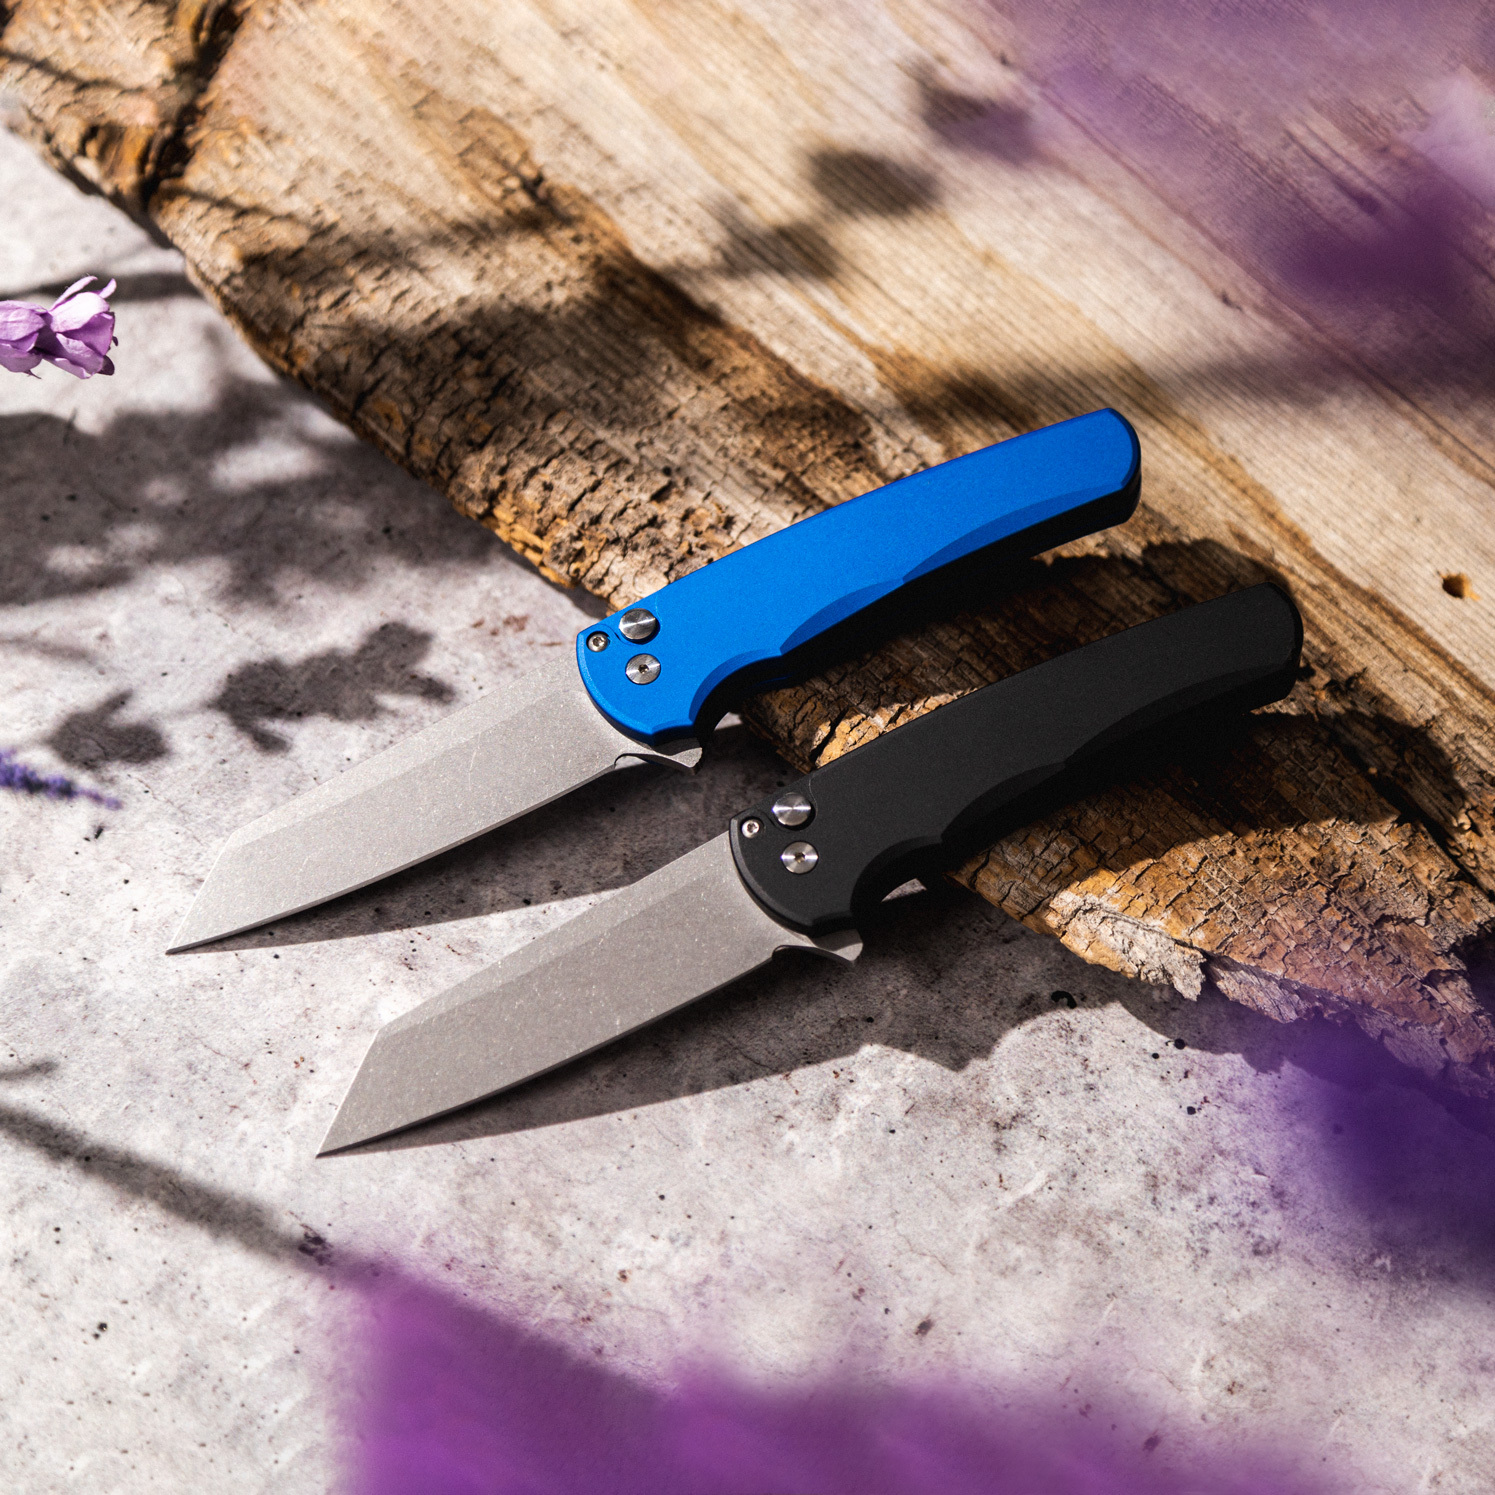 Button Lock Knives: What They Are and Why They’re So Popular